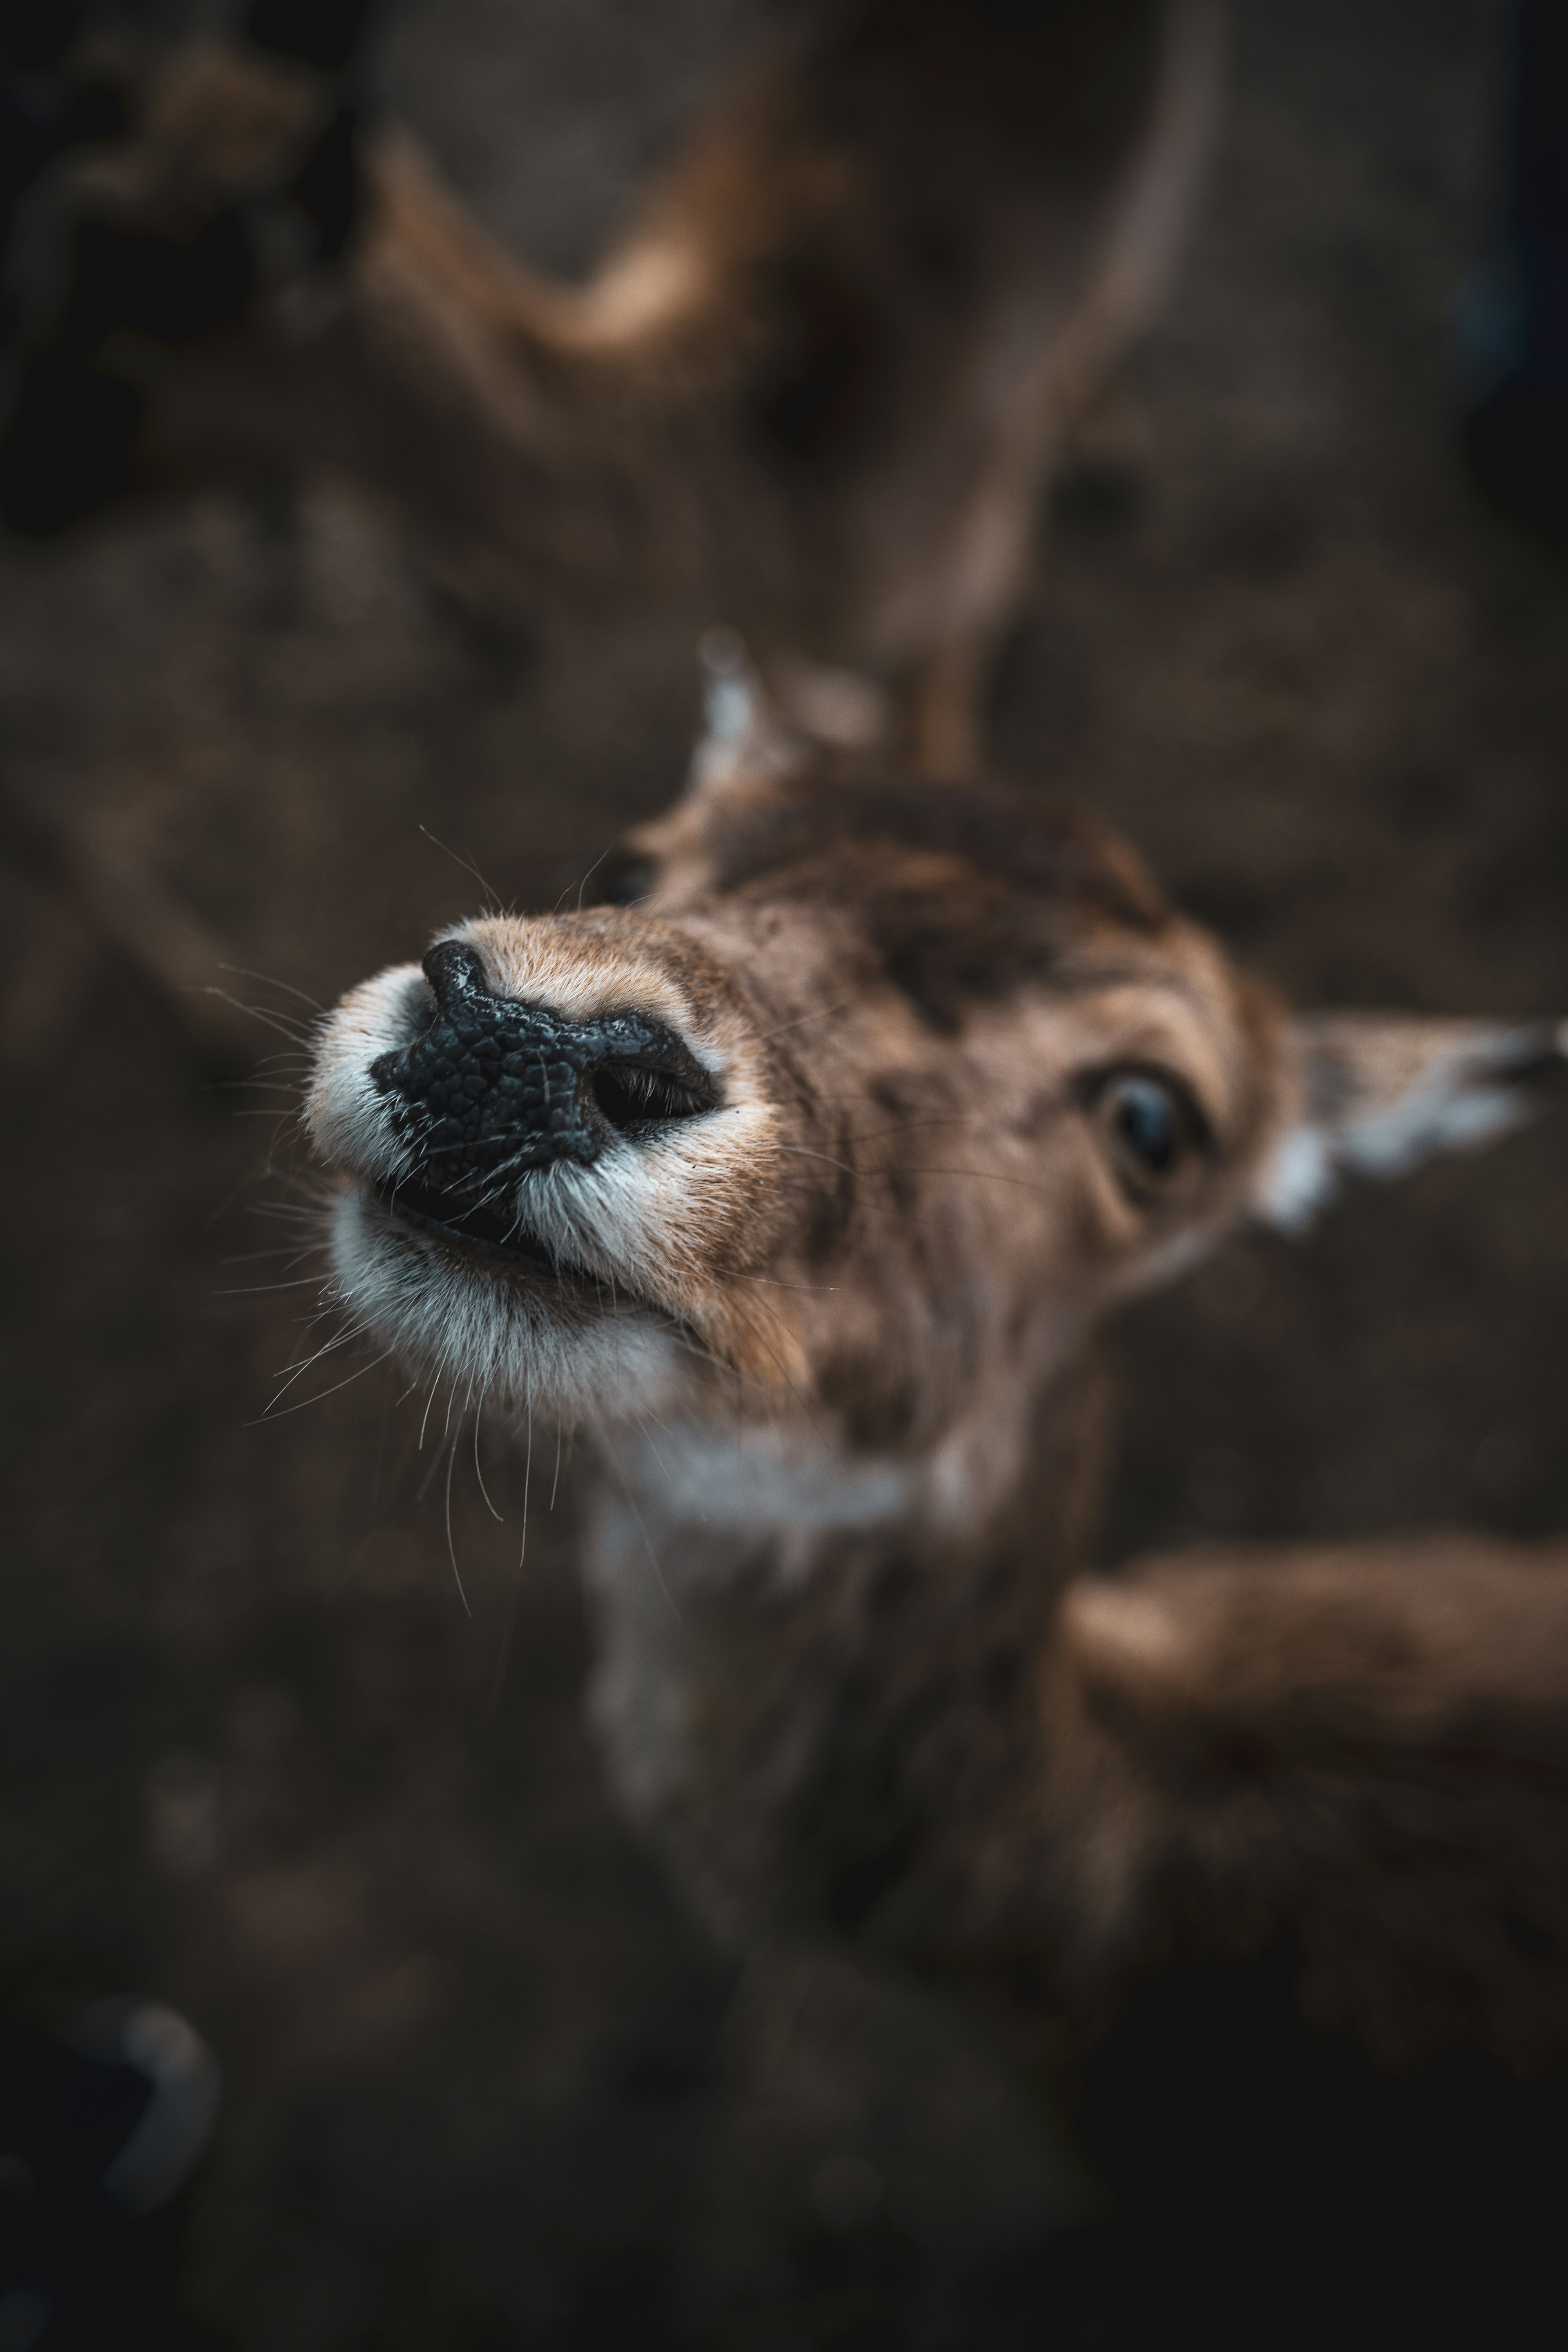 brown and white deer in close up photography